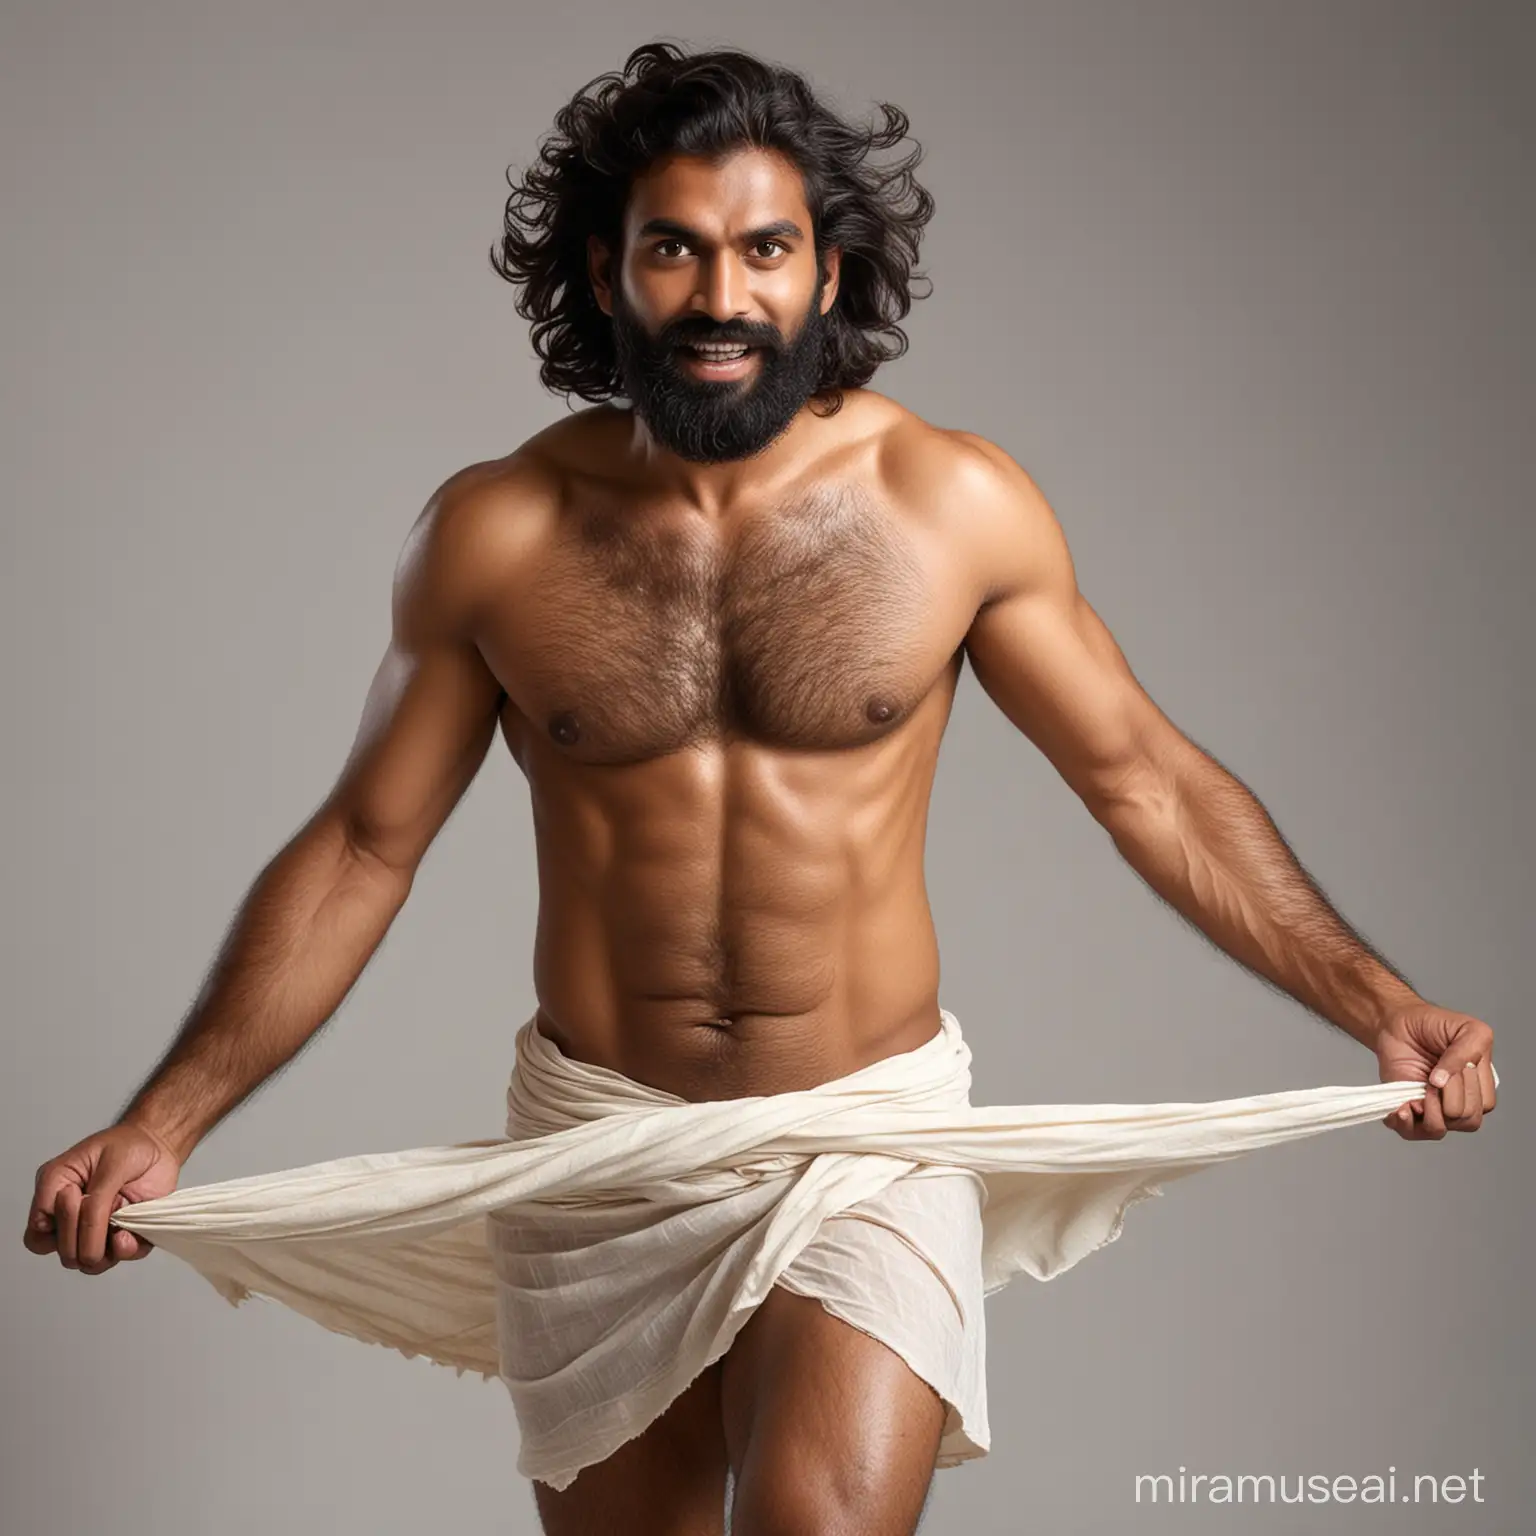 Indian Man with Fluttering Loincloth Traditional Attire and Cultural Symbolism